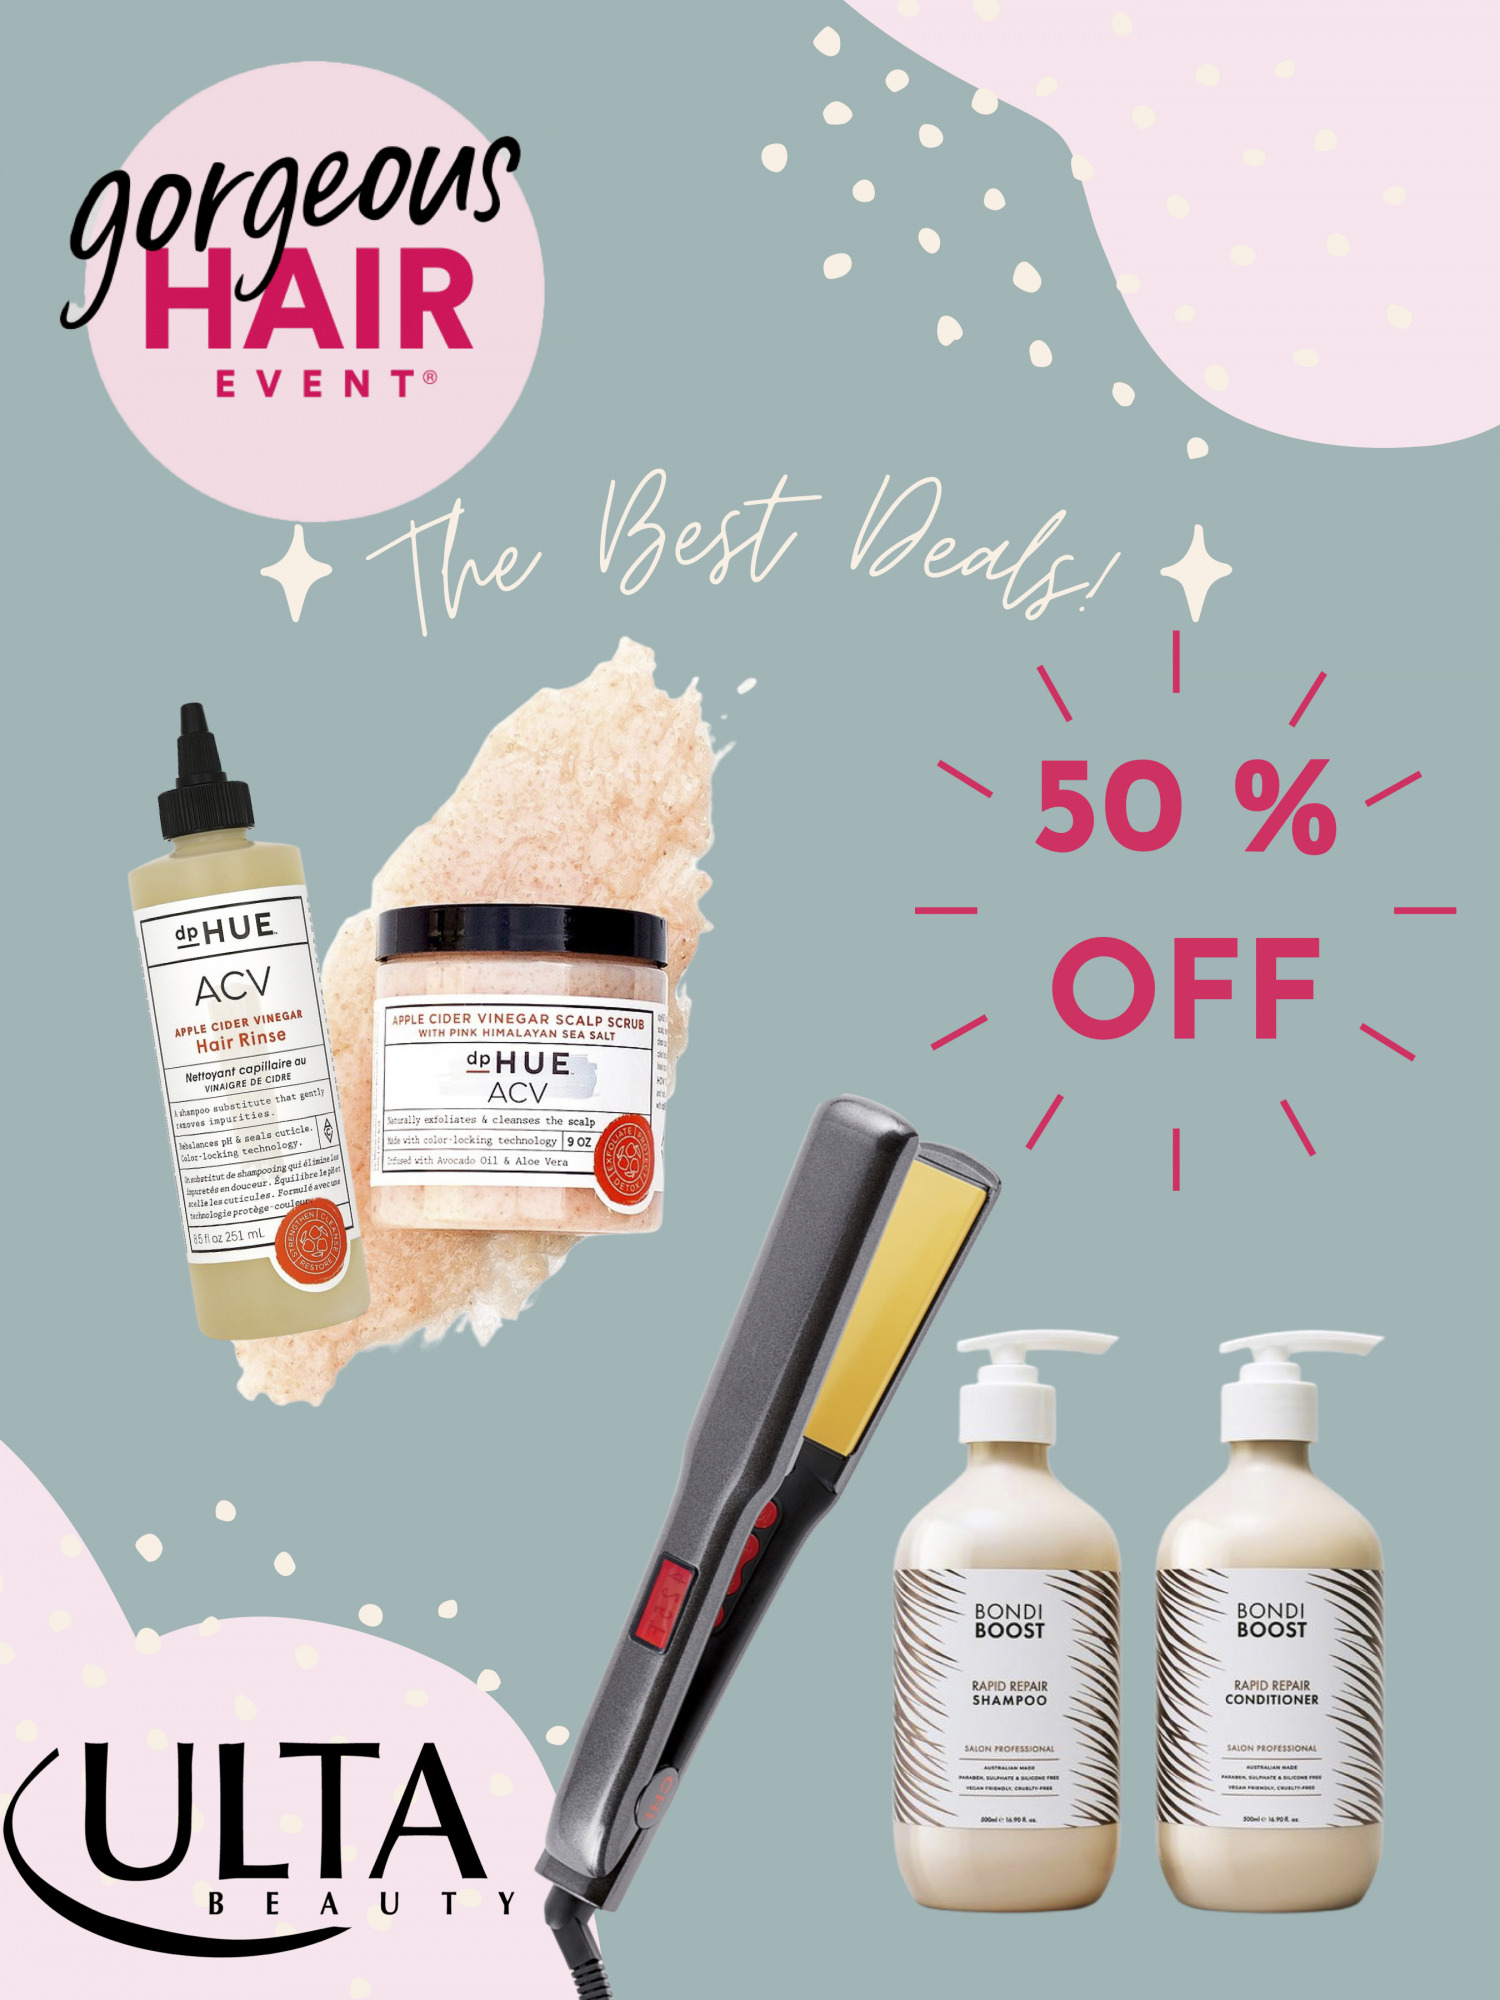 Ulta's Hair Event Is Here, And These Are The Best Deals